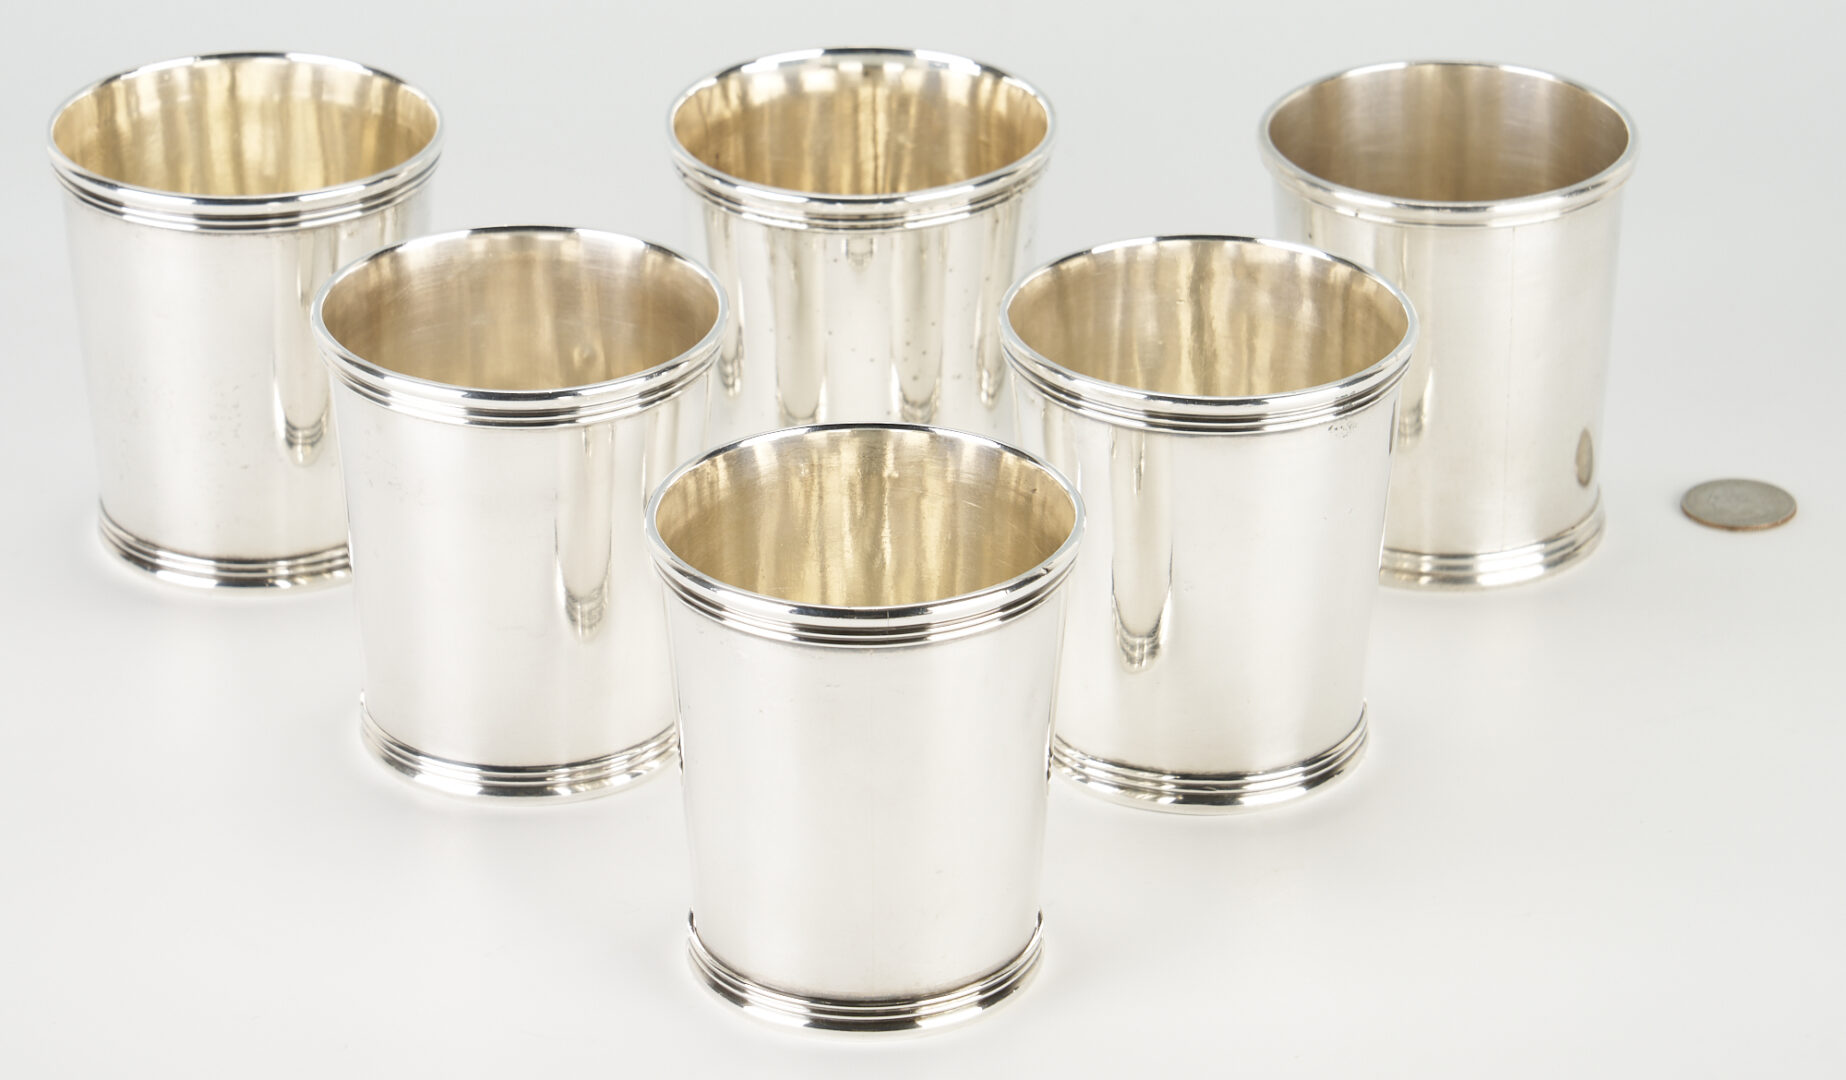 Lot 66: 6 Coin Silver Julep Cups, 19th century